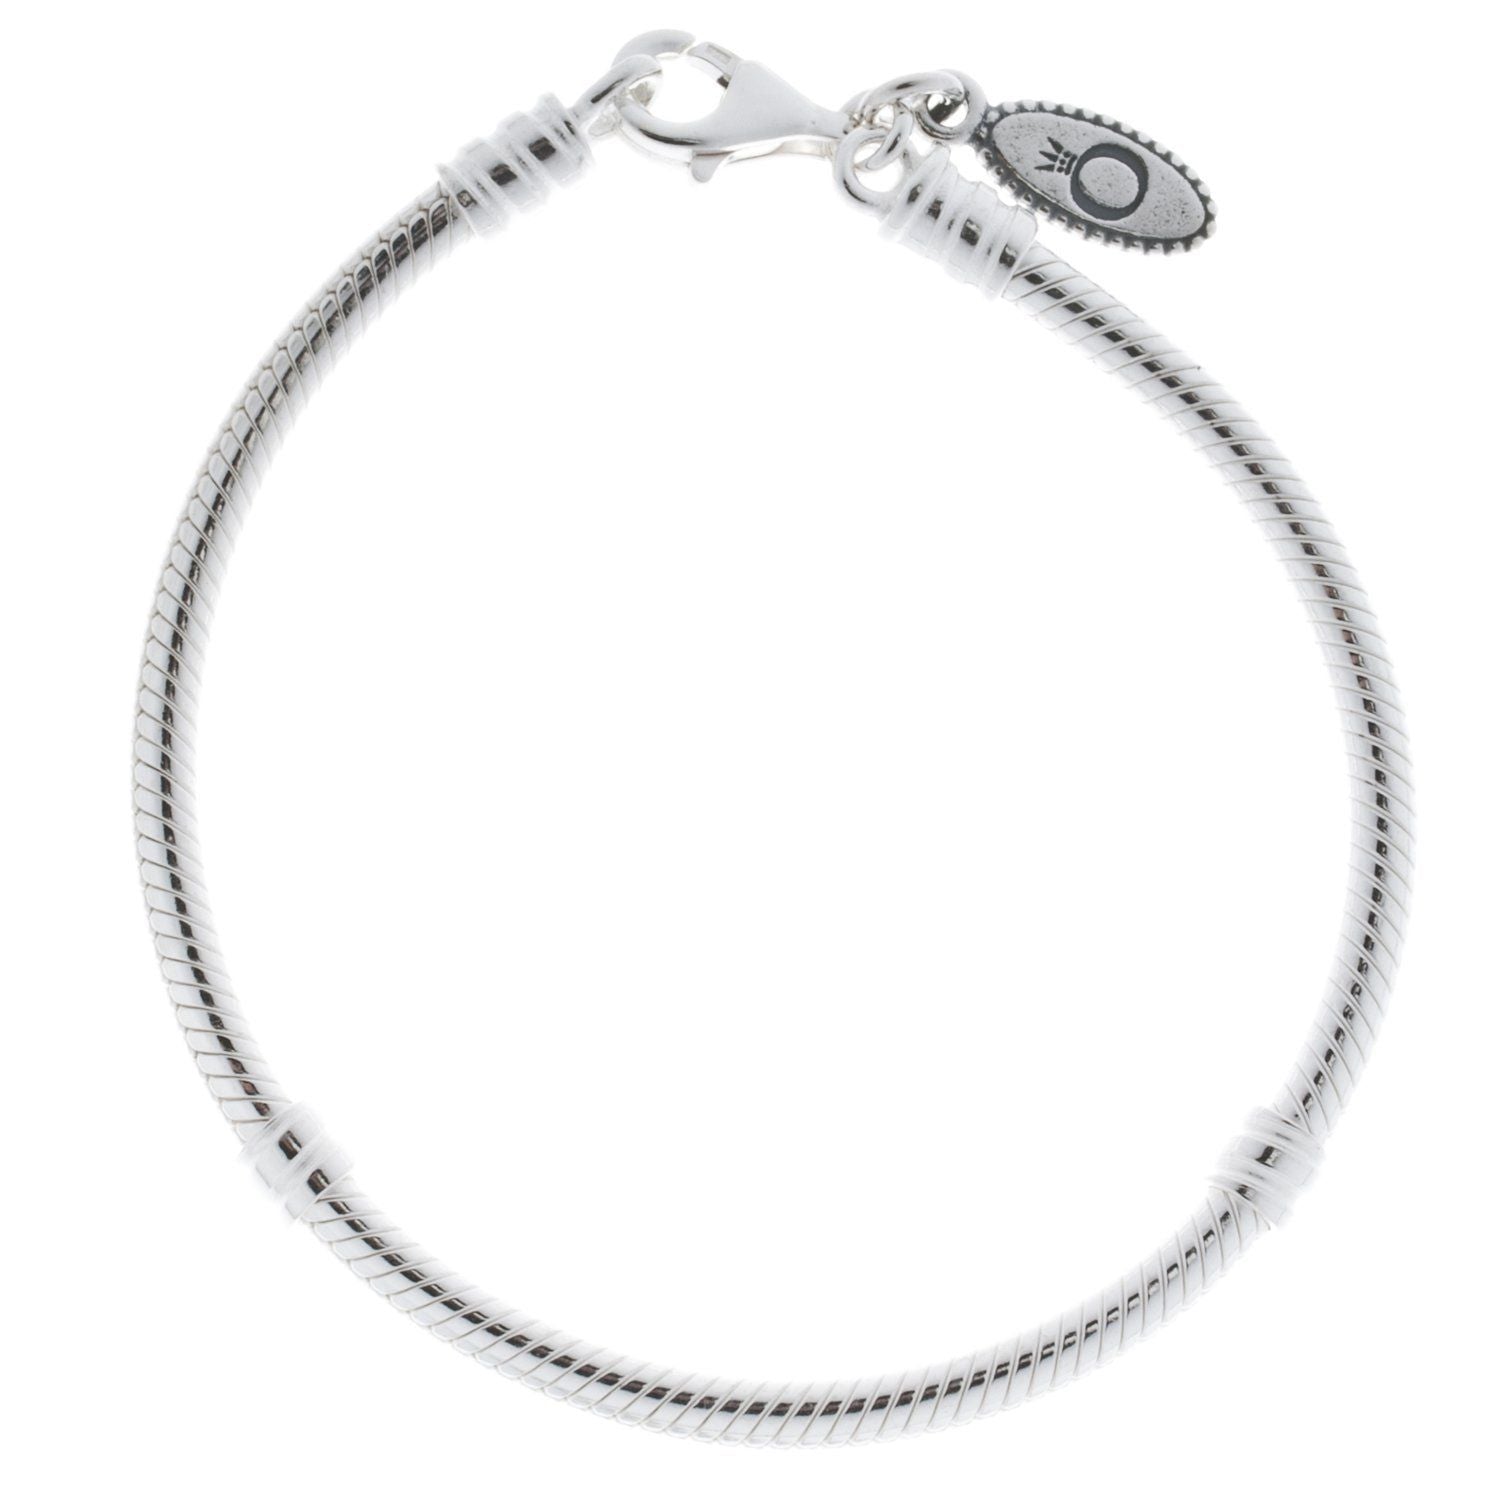 Curb Bracelet (Size - 8.5) With Lobster Clasp in Stainless Steel - 3723556  - TJC